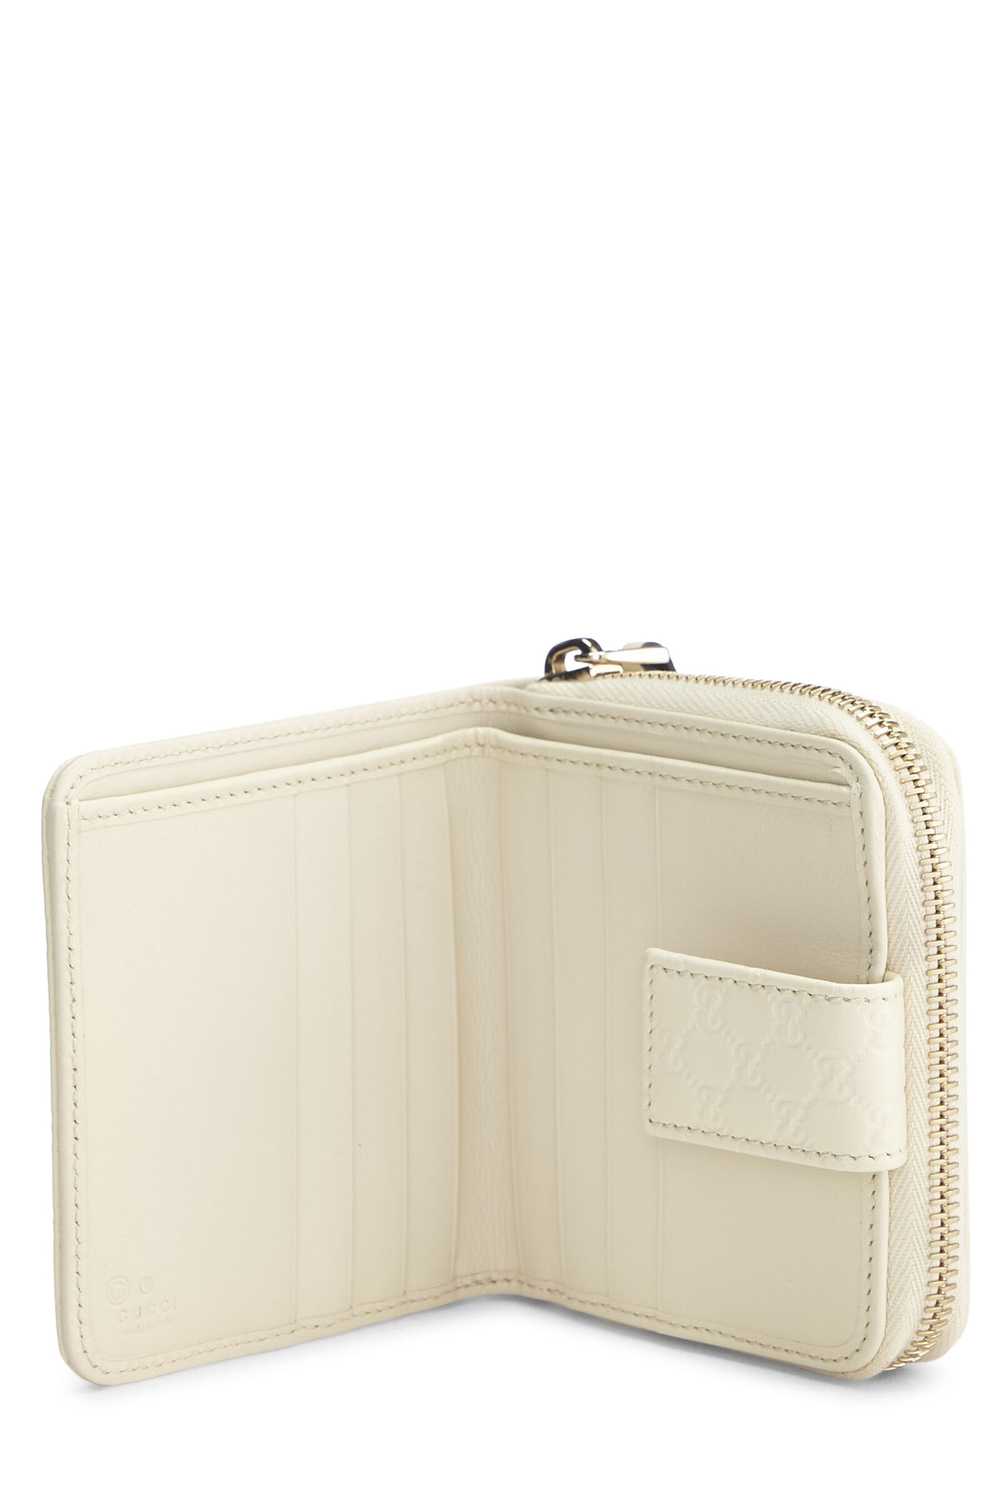 White Microguccissima French Compact Zip Wallet - image 4